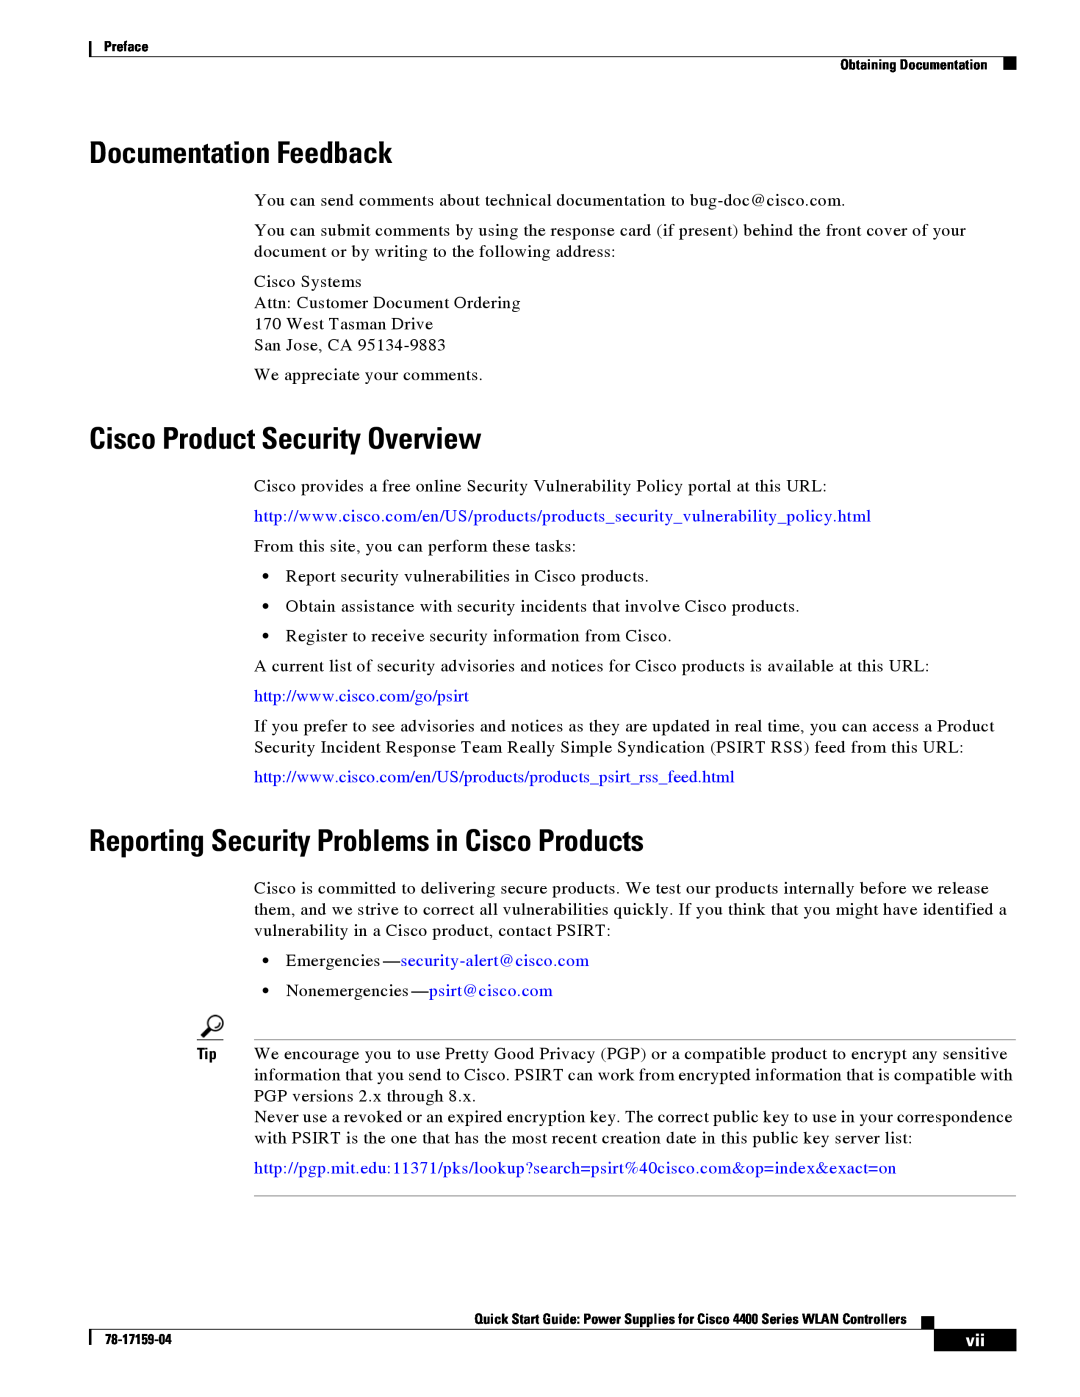 Cisco Systems 4400 Documentation Feedback, Cisco Product Security Overview, Reporting Security Problems in Cisco Products 